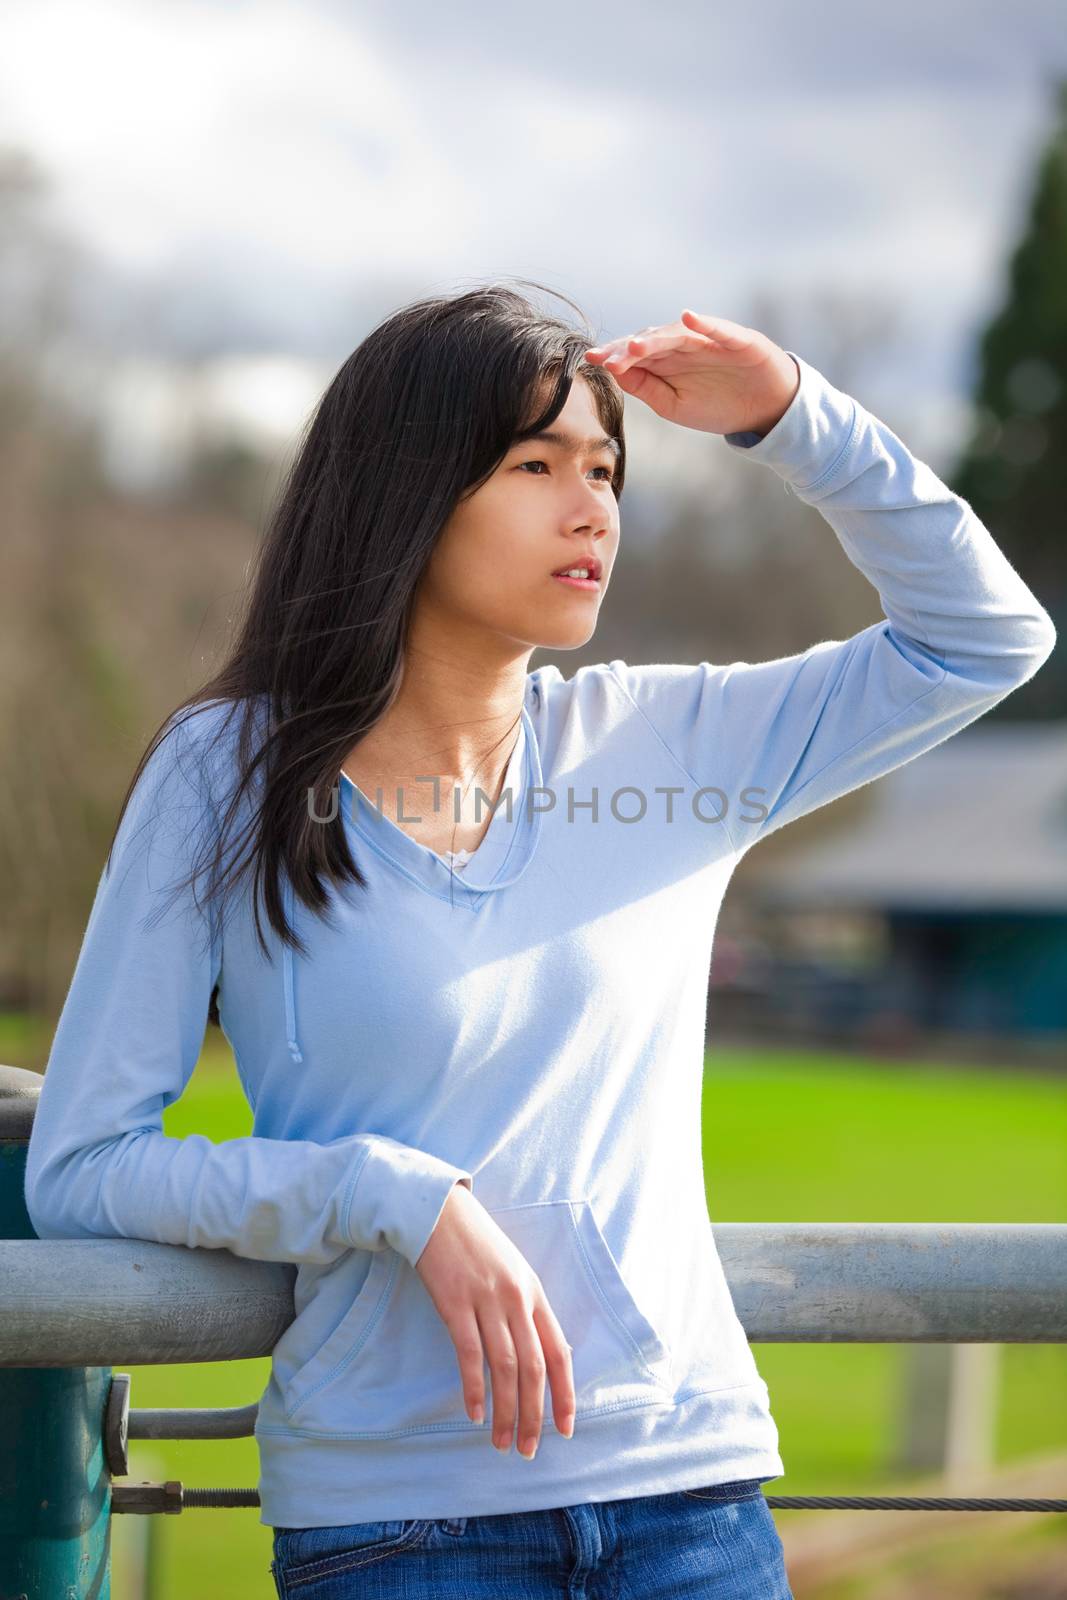 Young teen girl standing, leaning against railing at park shadin by jarenwicklund